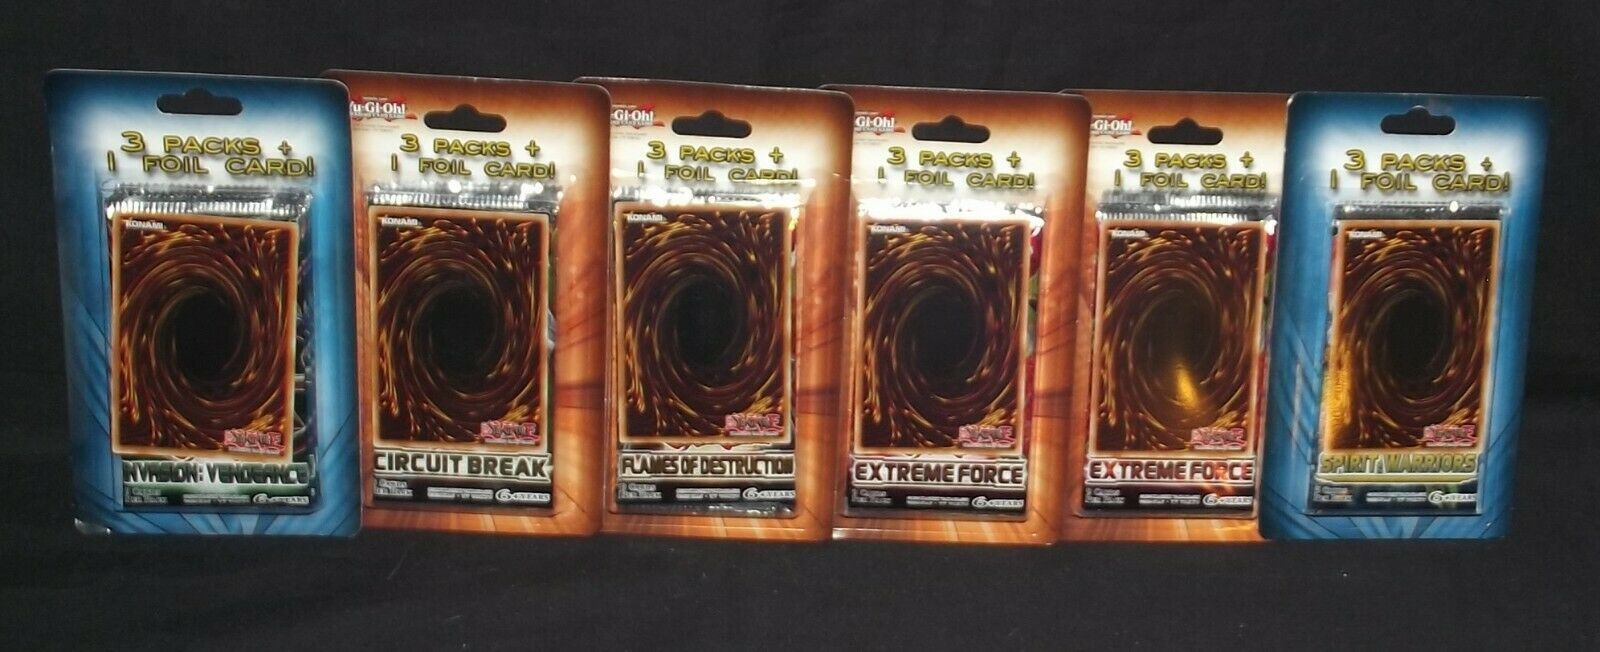 6 Yu-Gi-Oh Sealed 3-Pack Blisters w/Foil Cards, 4 Circuit Break Booster Packs